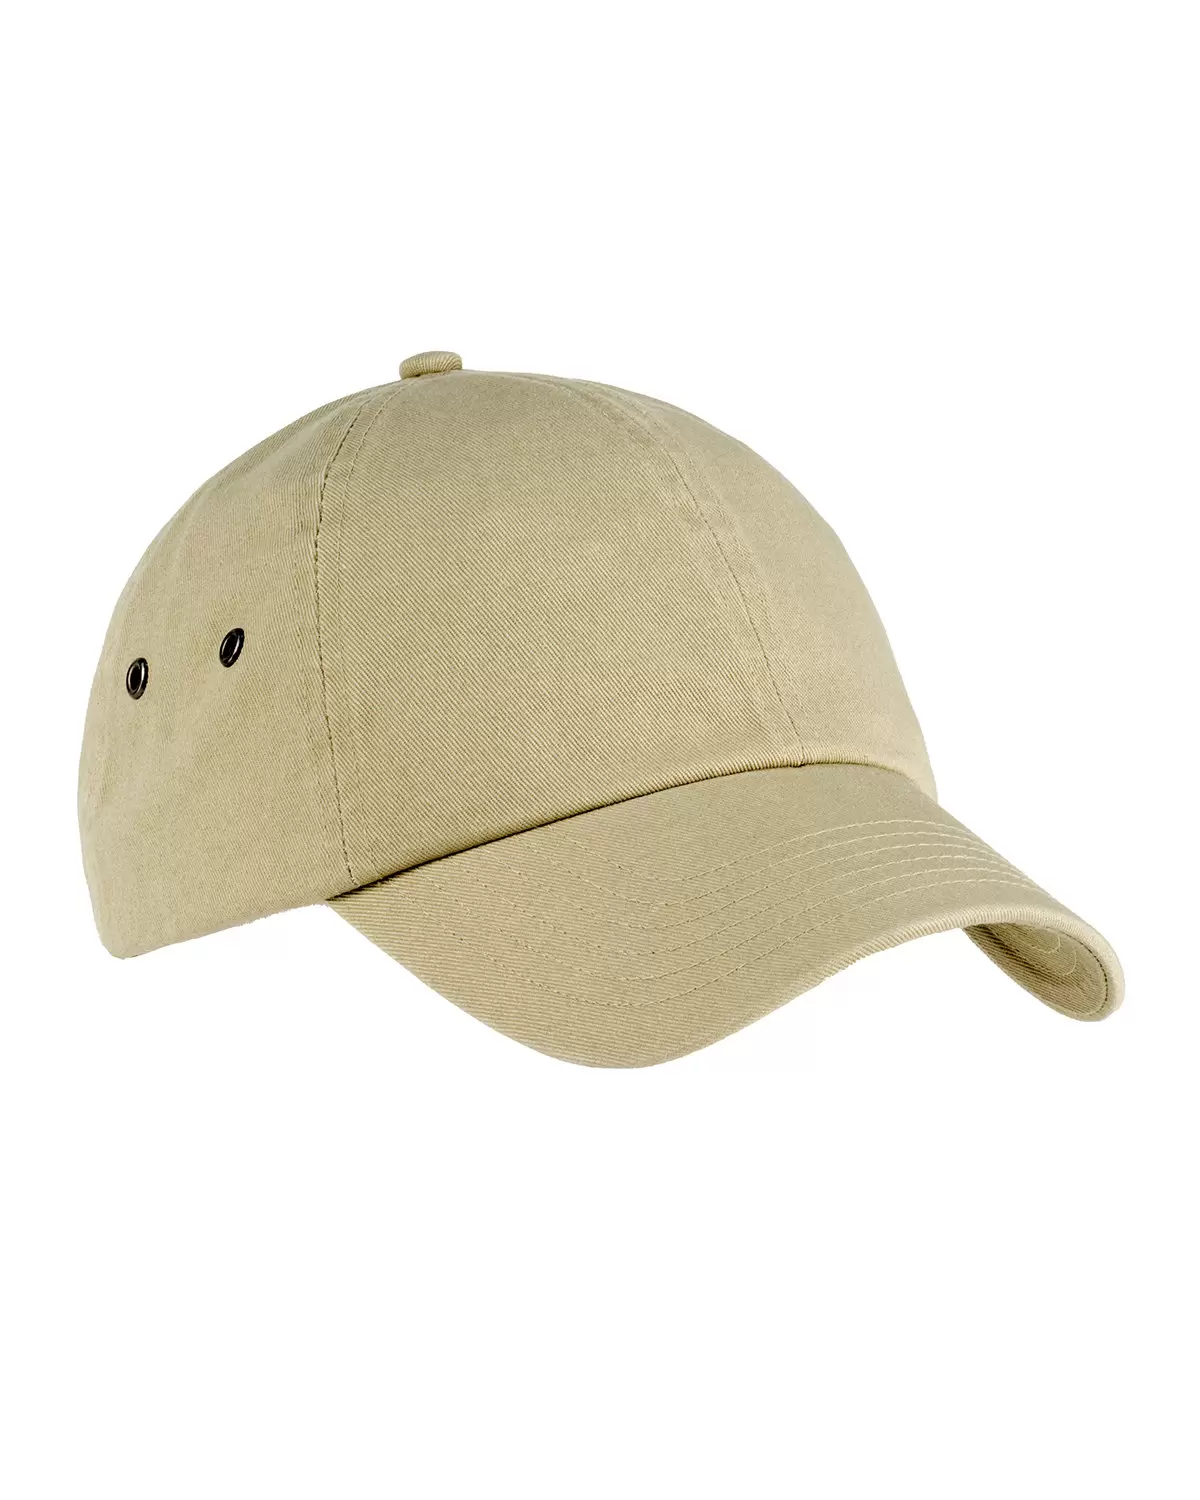 BA529 Big From Cap Baseball - Accessories Washed